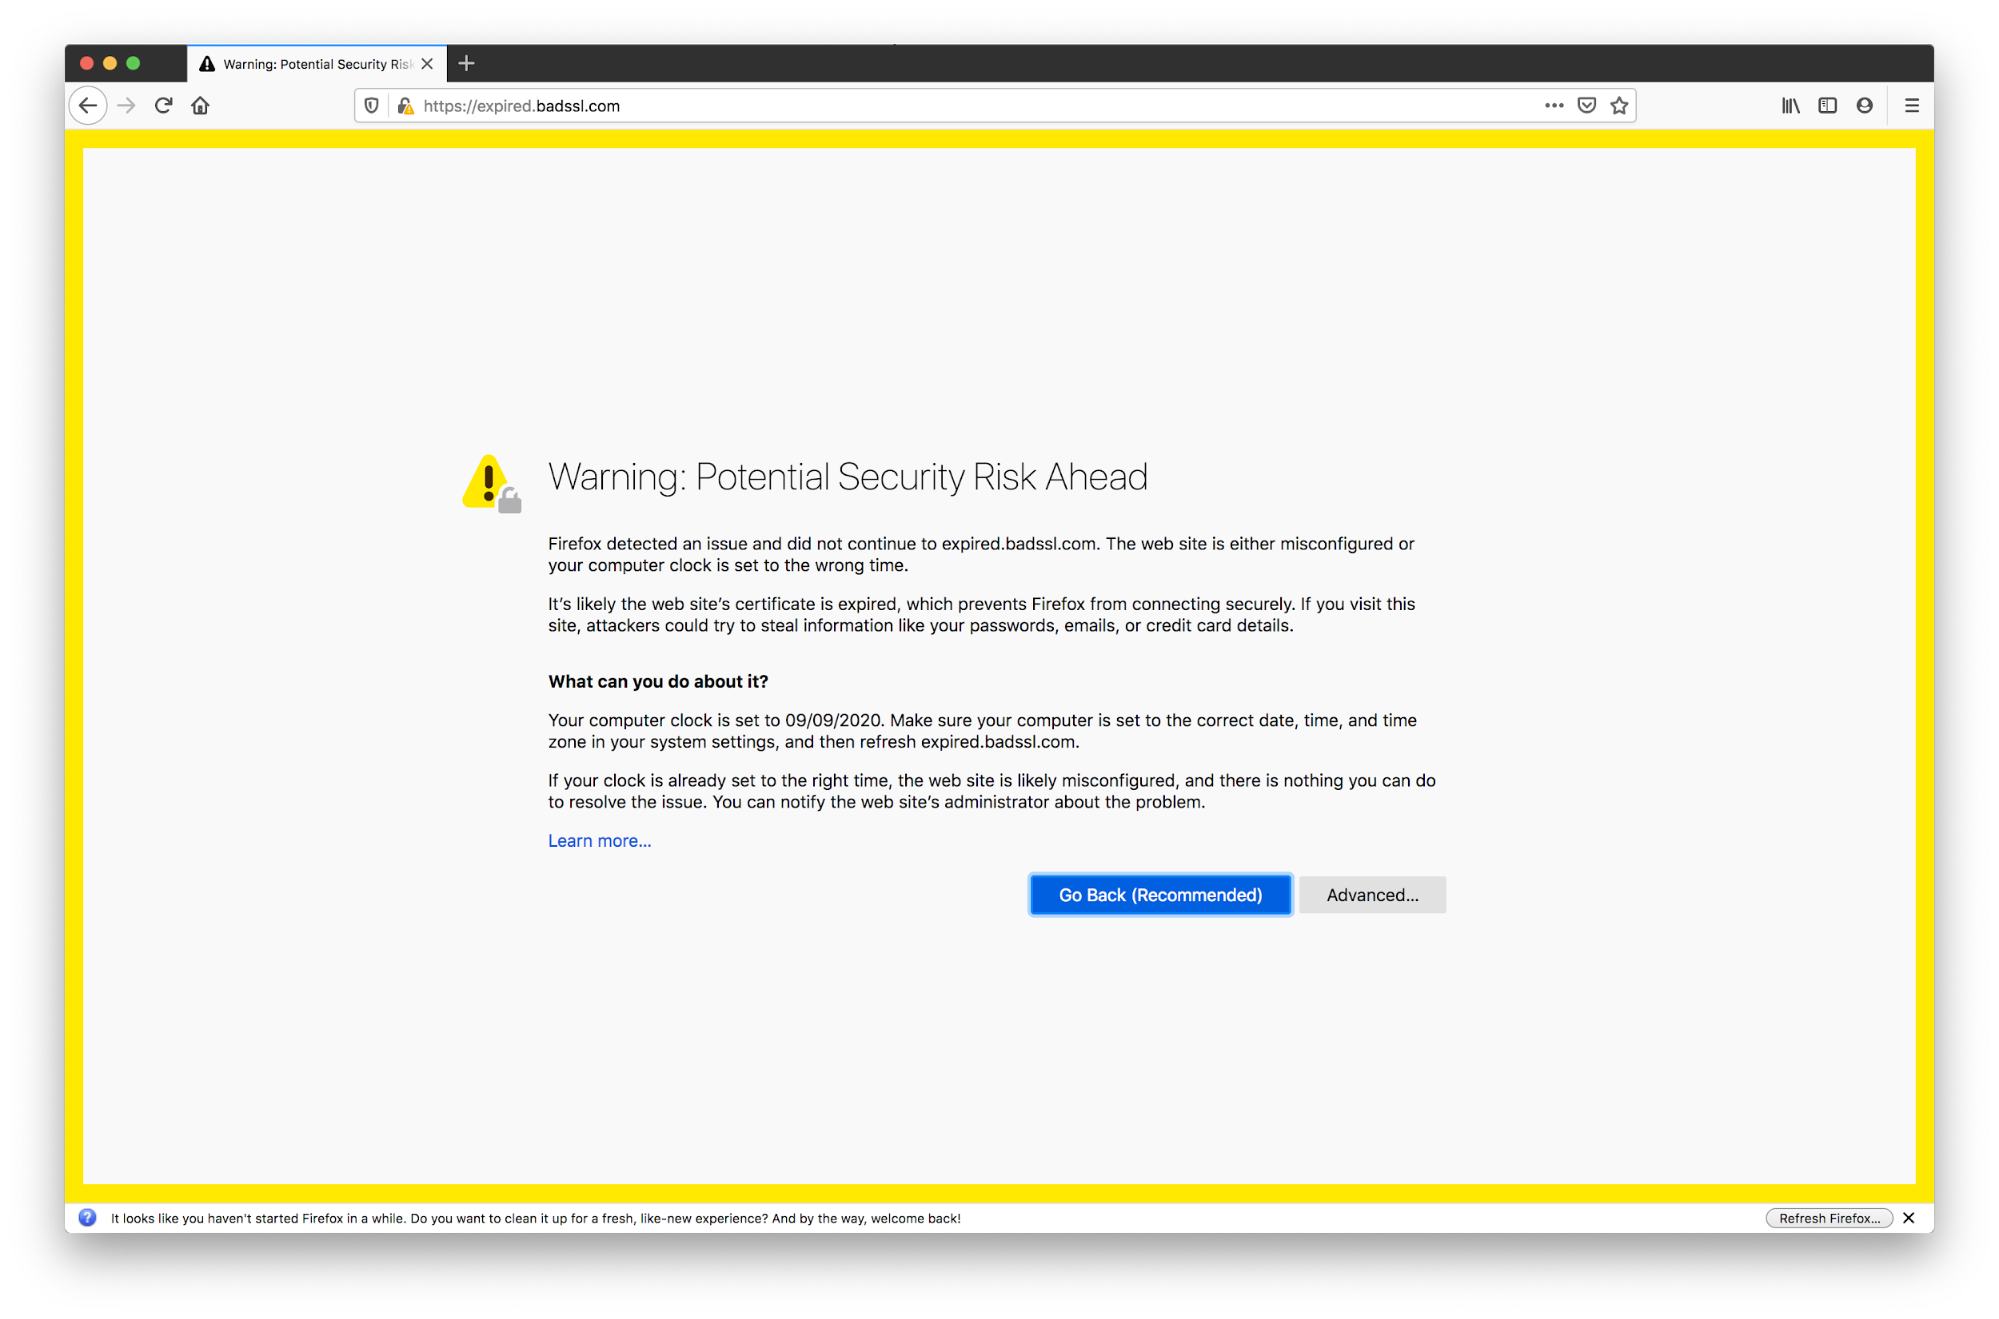 Access the website in question
Check for any SSL certificate errors or warnings